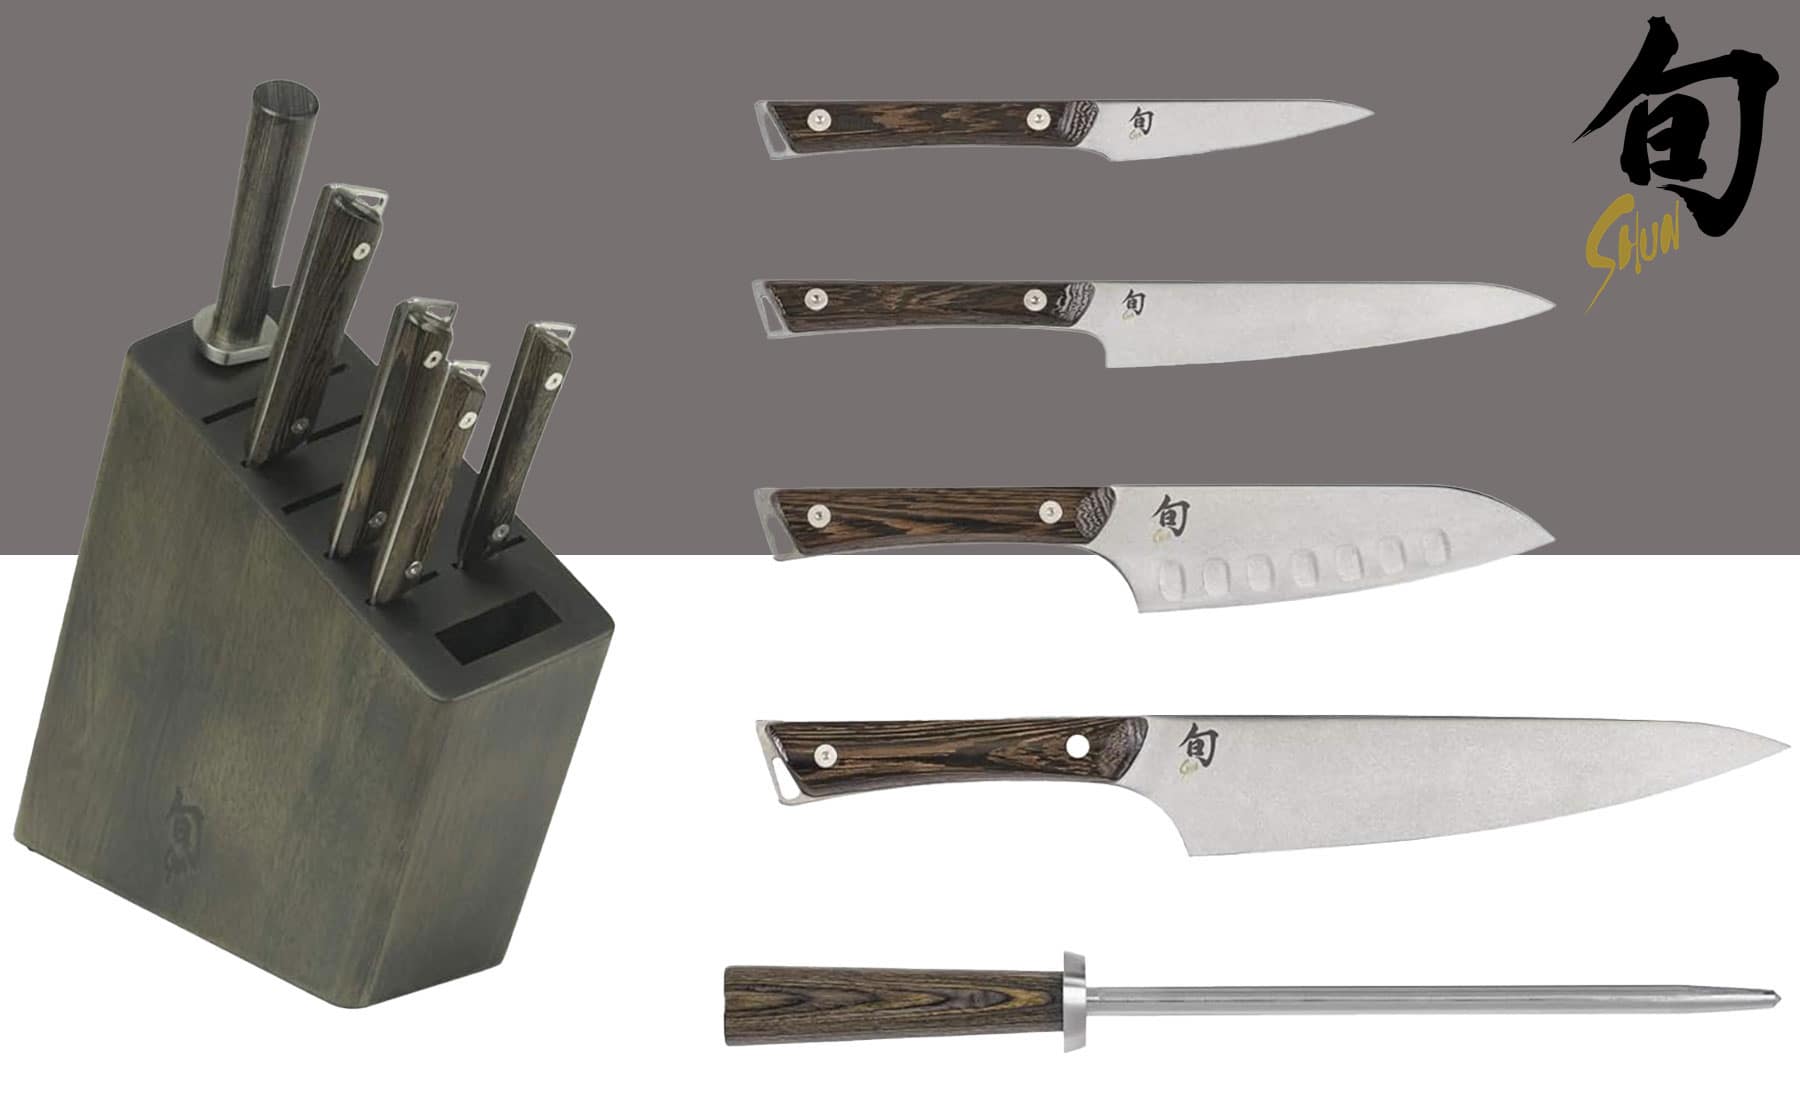 The Shun Kanso 6-piece set is one of the best professional knife sets we have tested. It offers a good balance between performance and durability. 